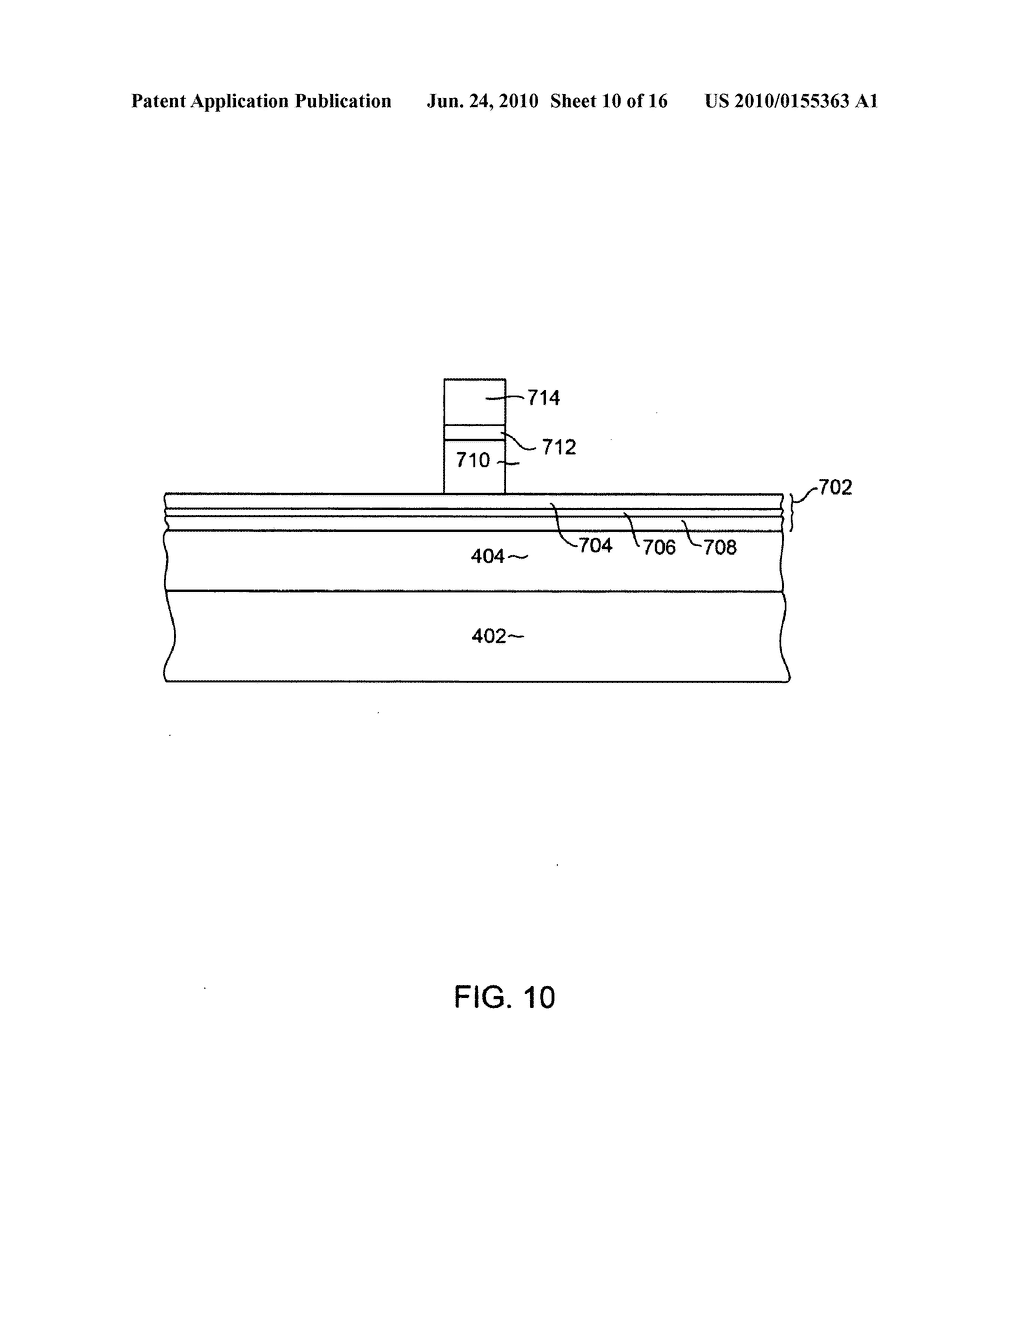 METHOD FOR MANUFACTURING A MAGNETIC WRITE HEAD HAVING A WRITE POLE WITH A TRAILING EDGE TAPER USING A RIEABLE HARD MASK - diagram, schematic, and image 11